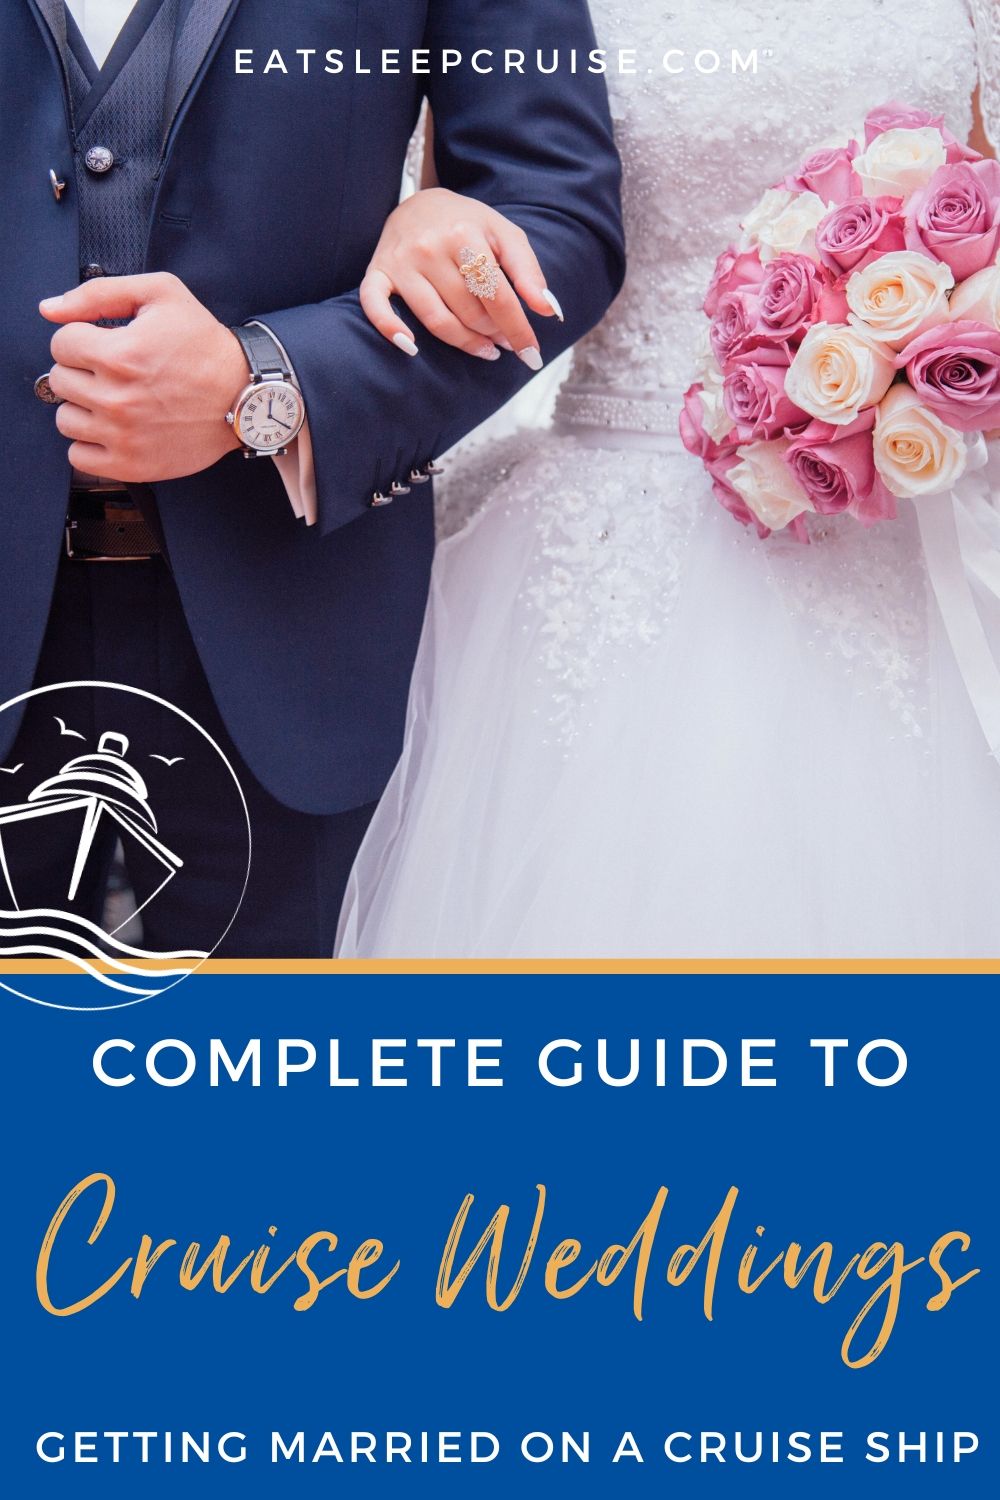 Cruise Weddings: A Complete Guide to Getting Married on a Cruise Ship